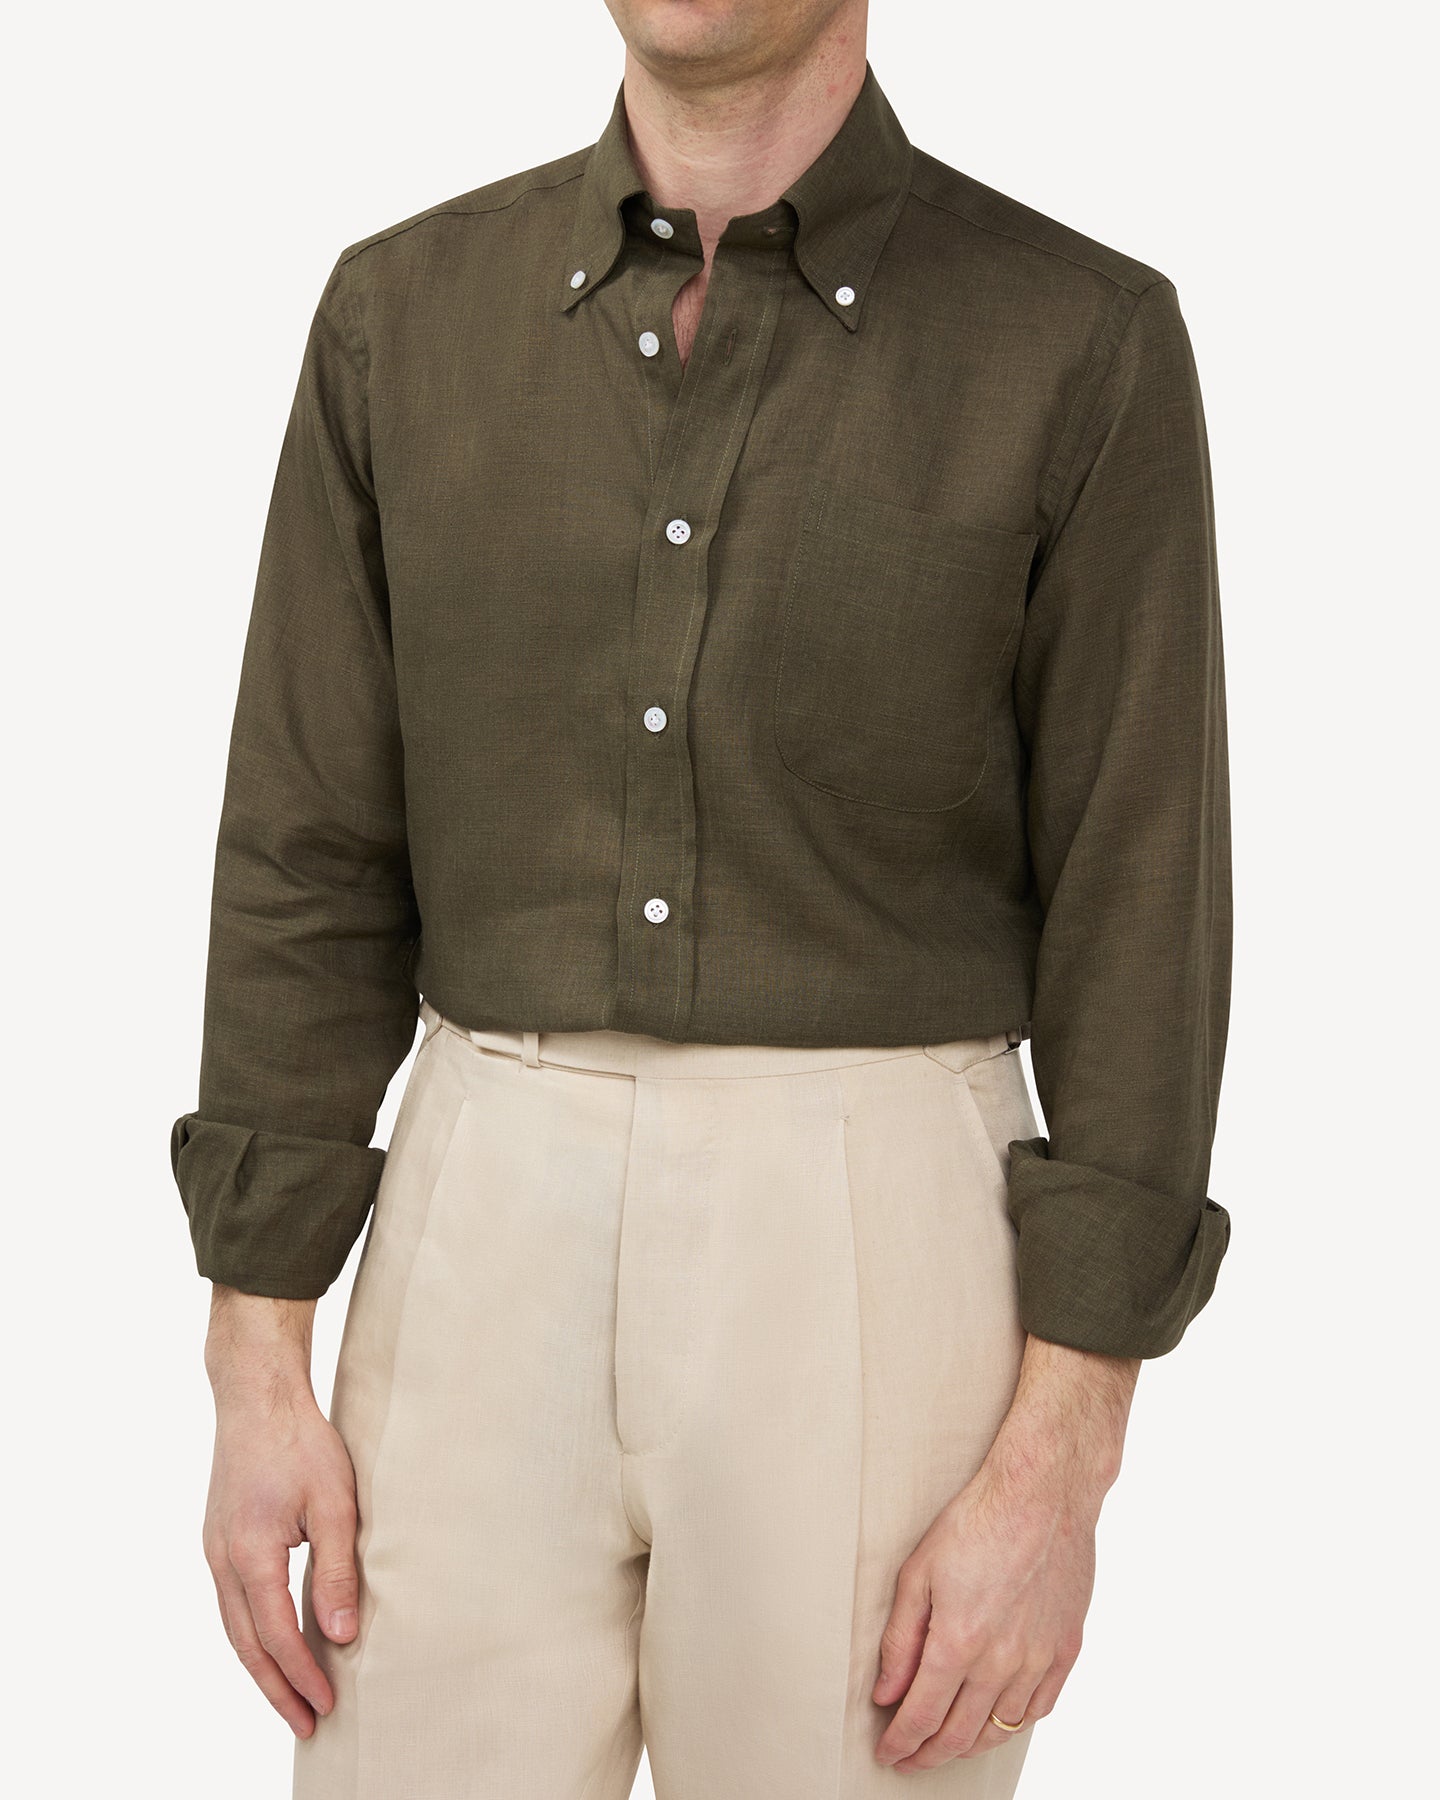 Man wearing olive green linen shirt and stone linen trousers